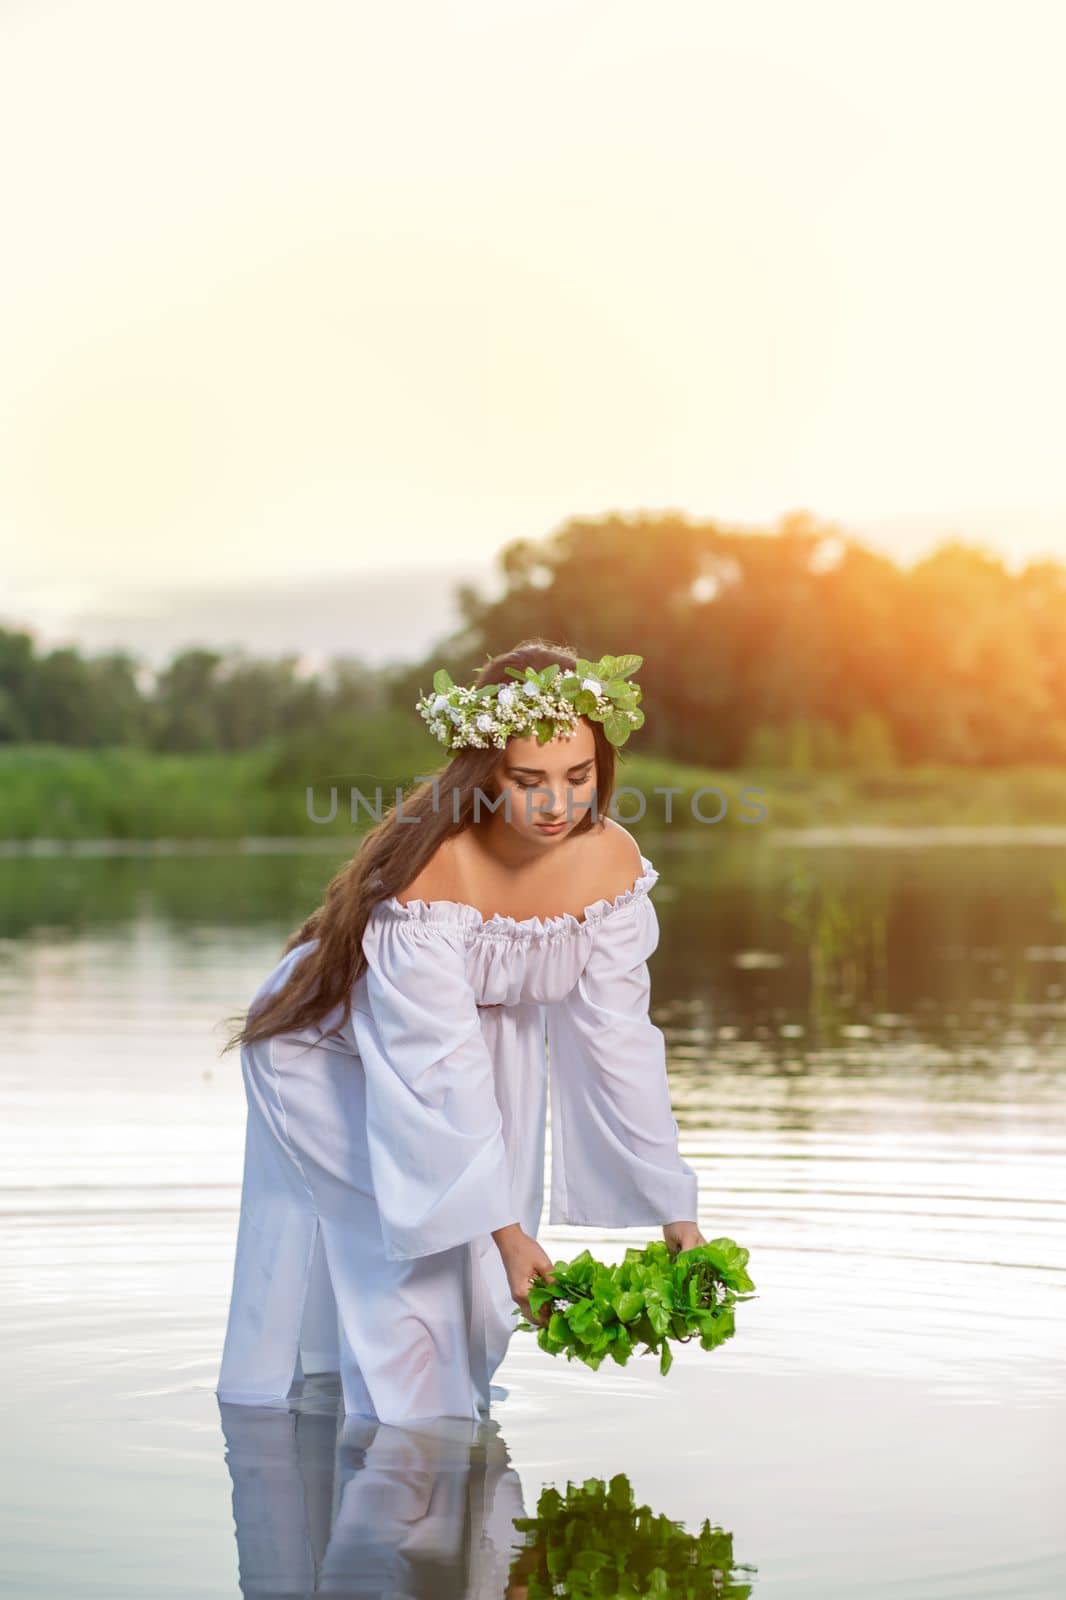 Woman in white dress in the water. Art Woman with wreath on her head in river. Wreath on her head, Slavic traditions and paganism by nazarovsergey